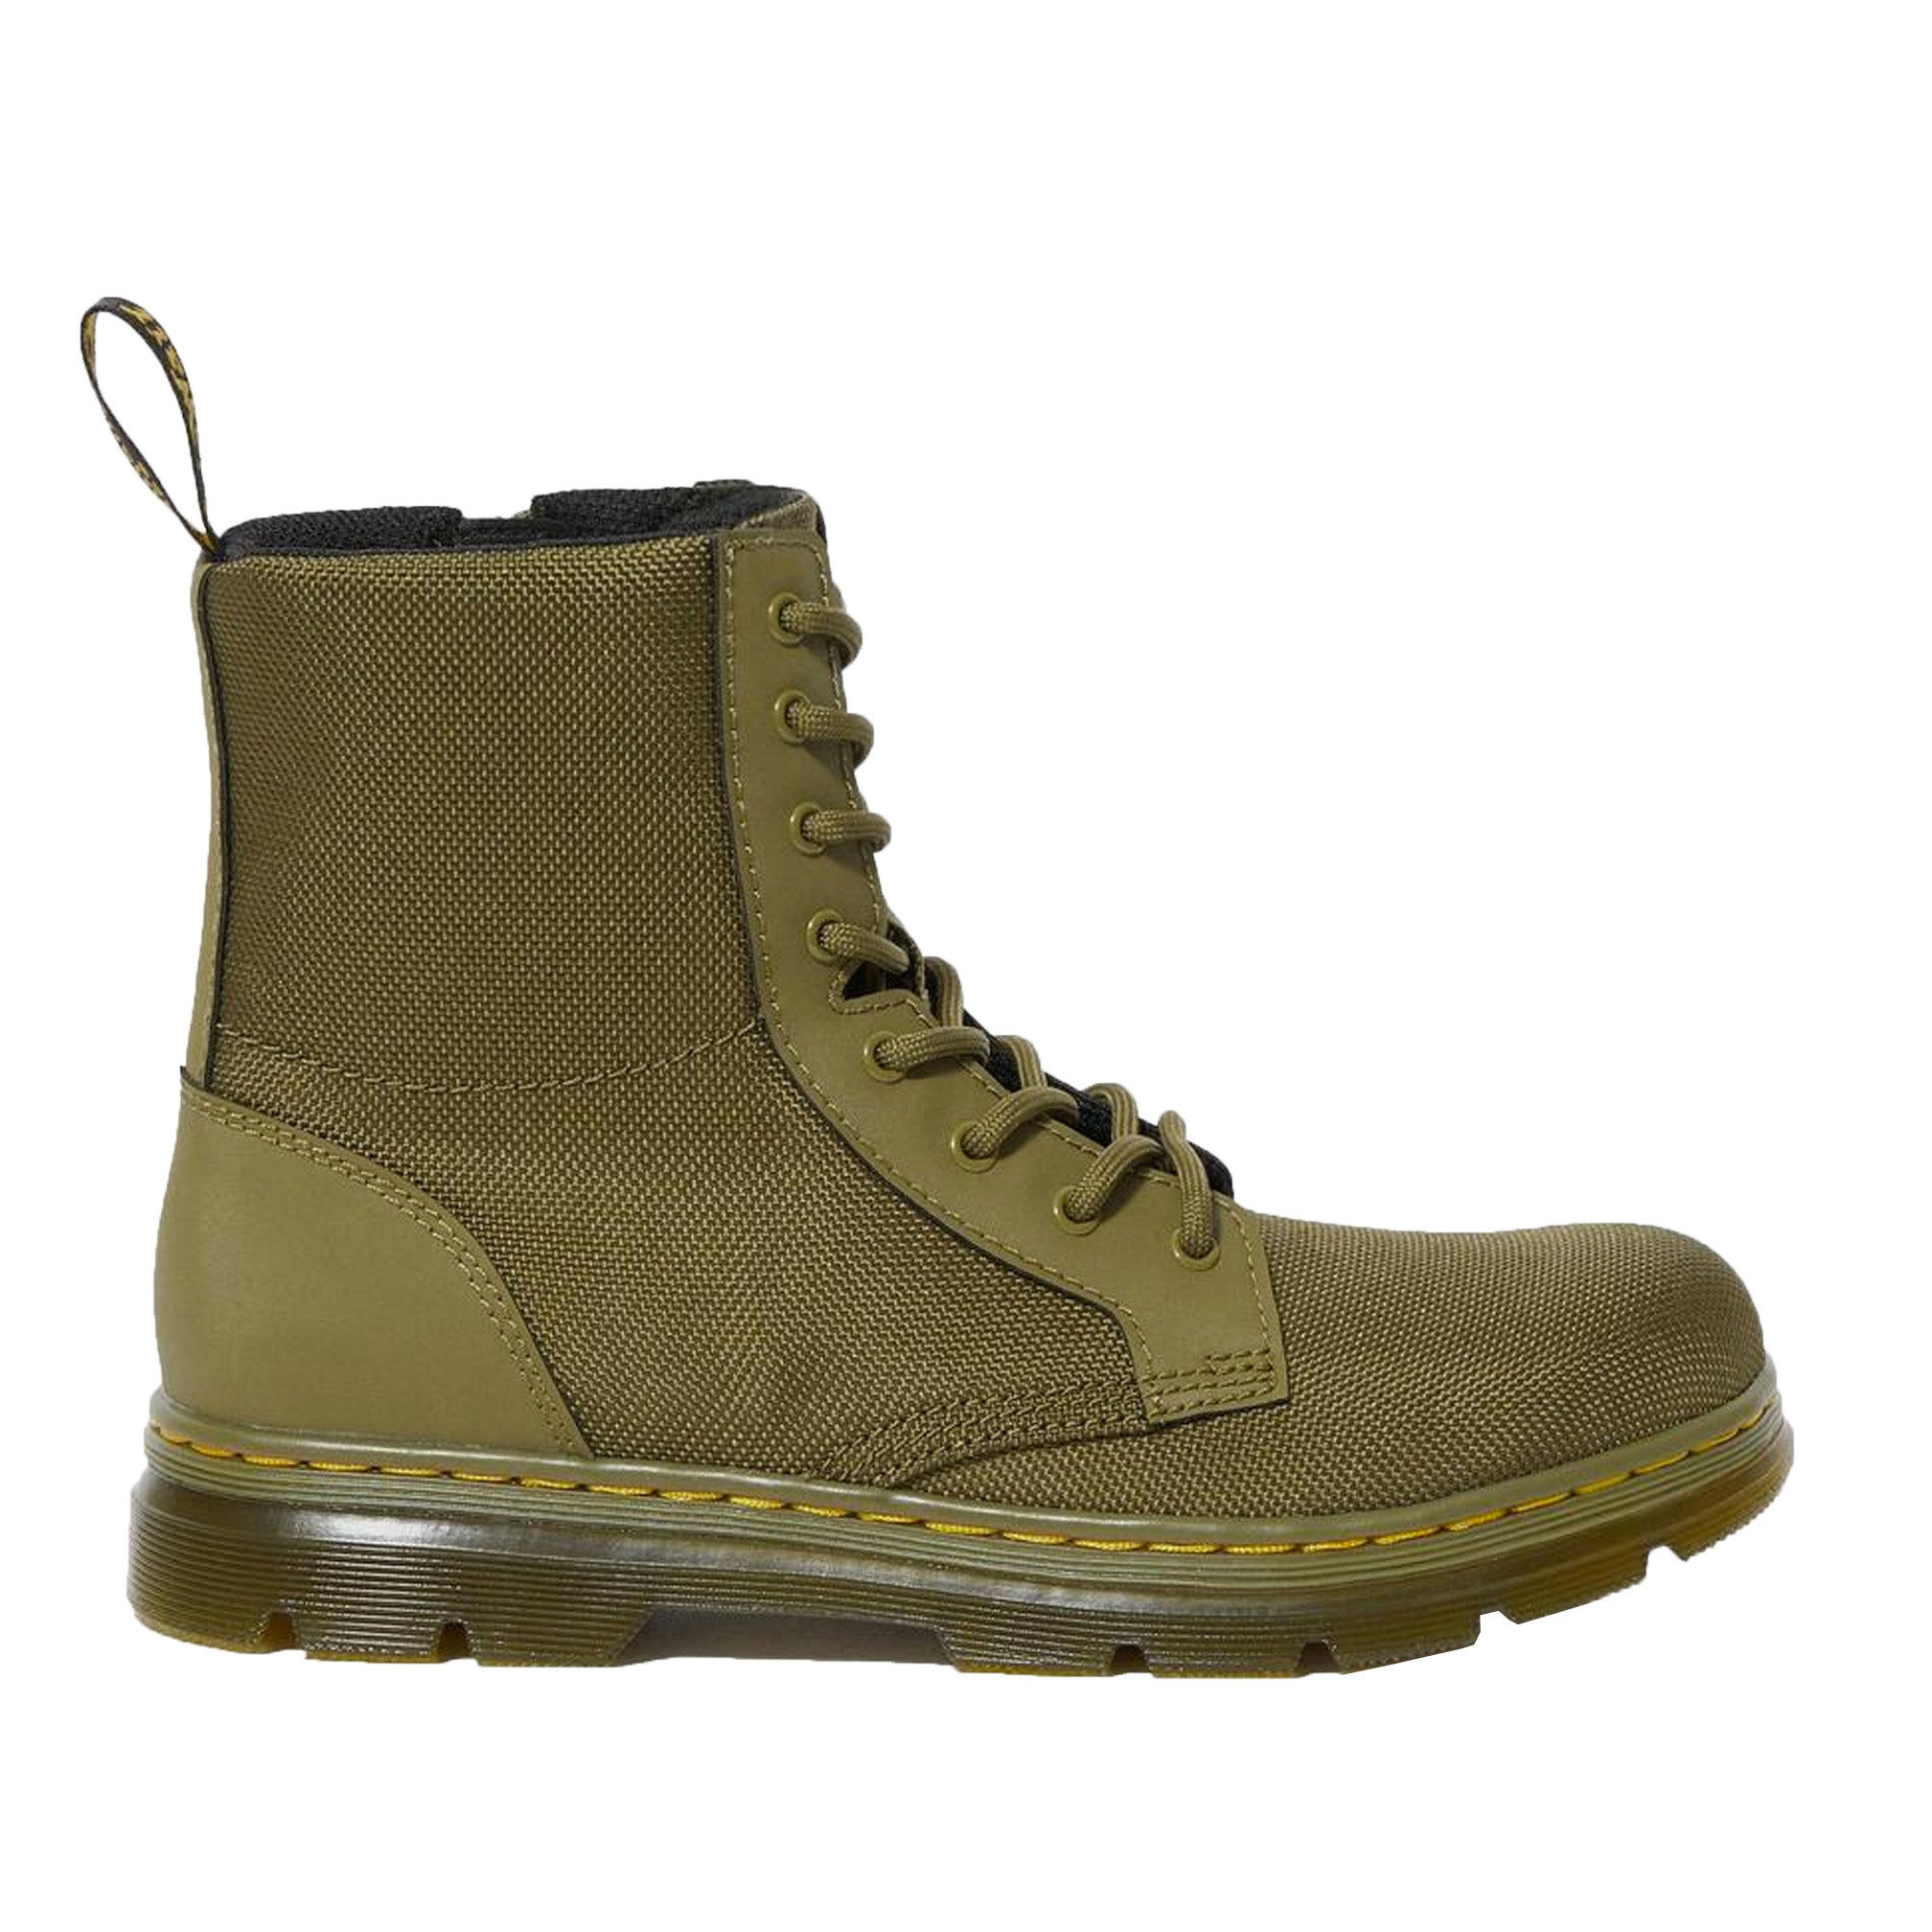 Dr. Martens Combs Olive Boots